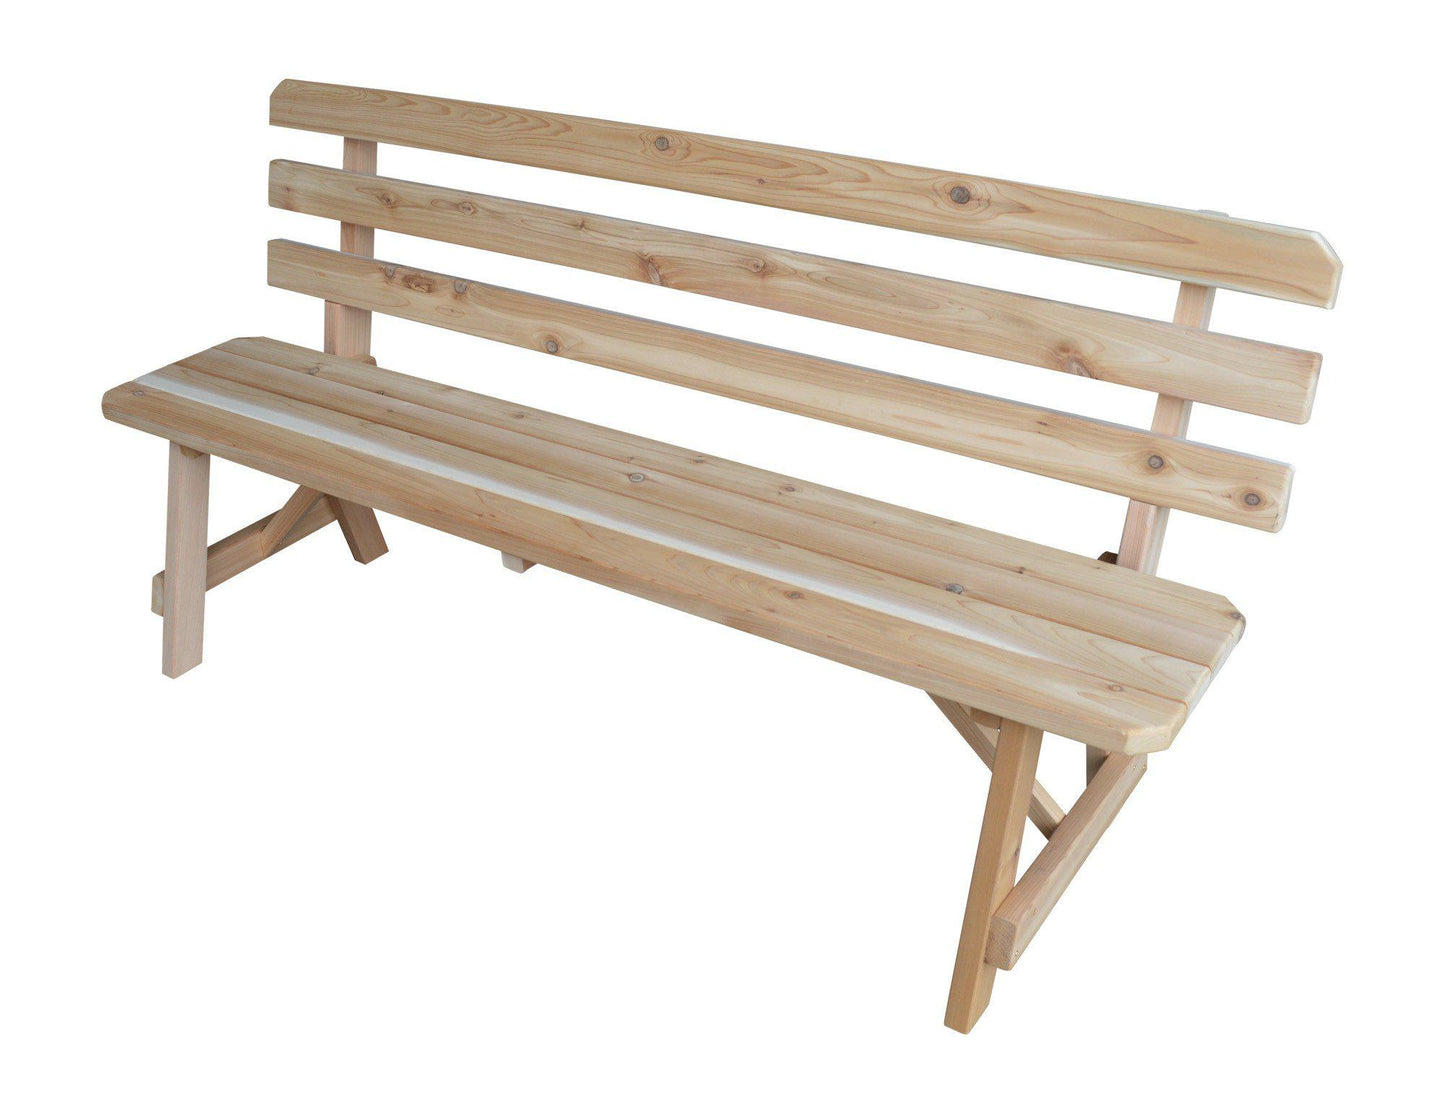 A&L FURNITURE CO.Western Red Cedar 70" Traditional Backed Bench Only - LEAD TIME TO SHIP 4 WEEKS OR LESS